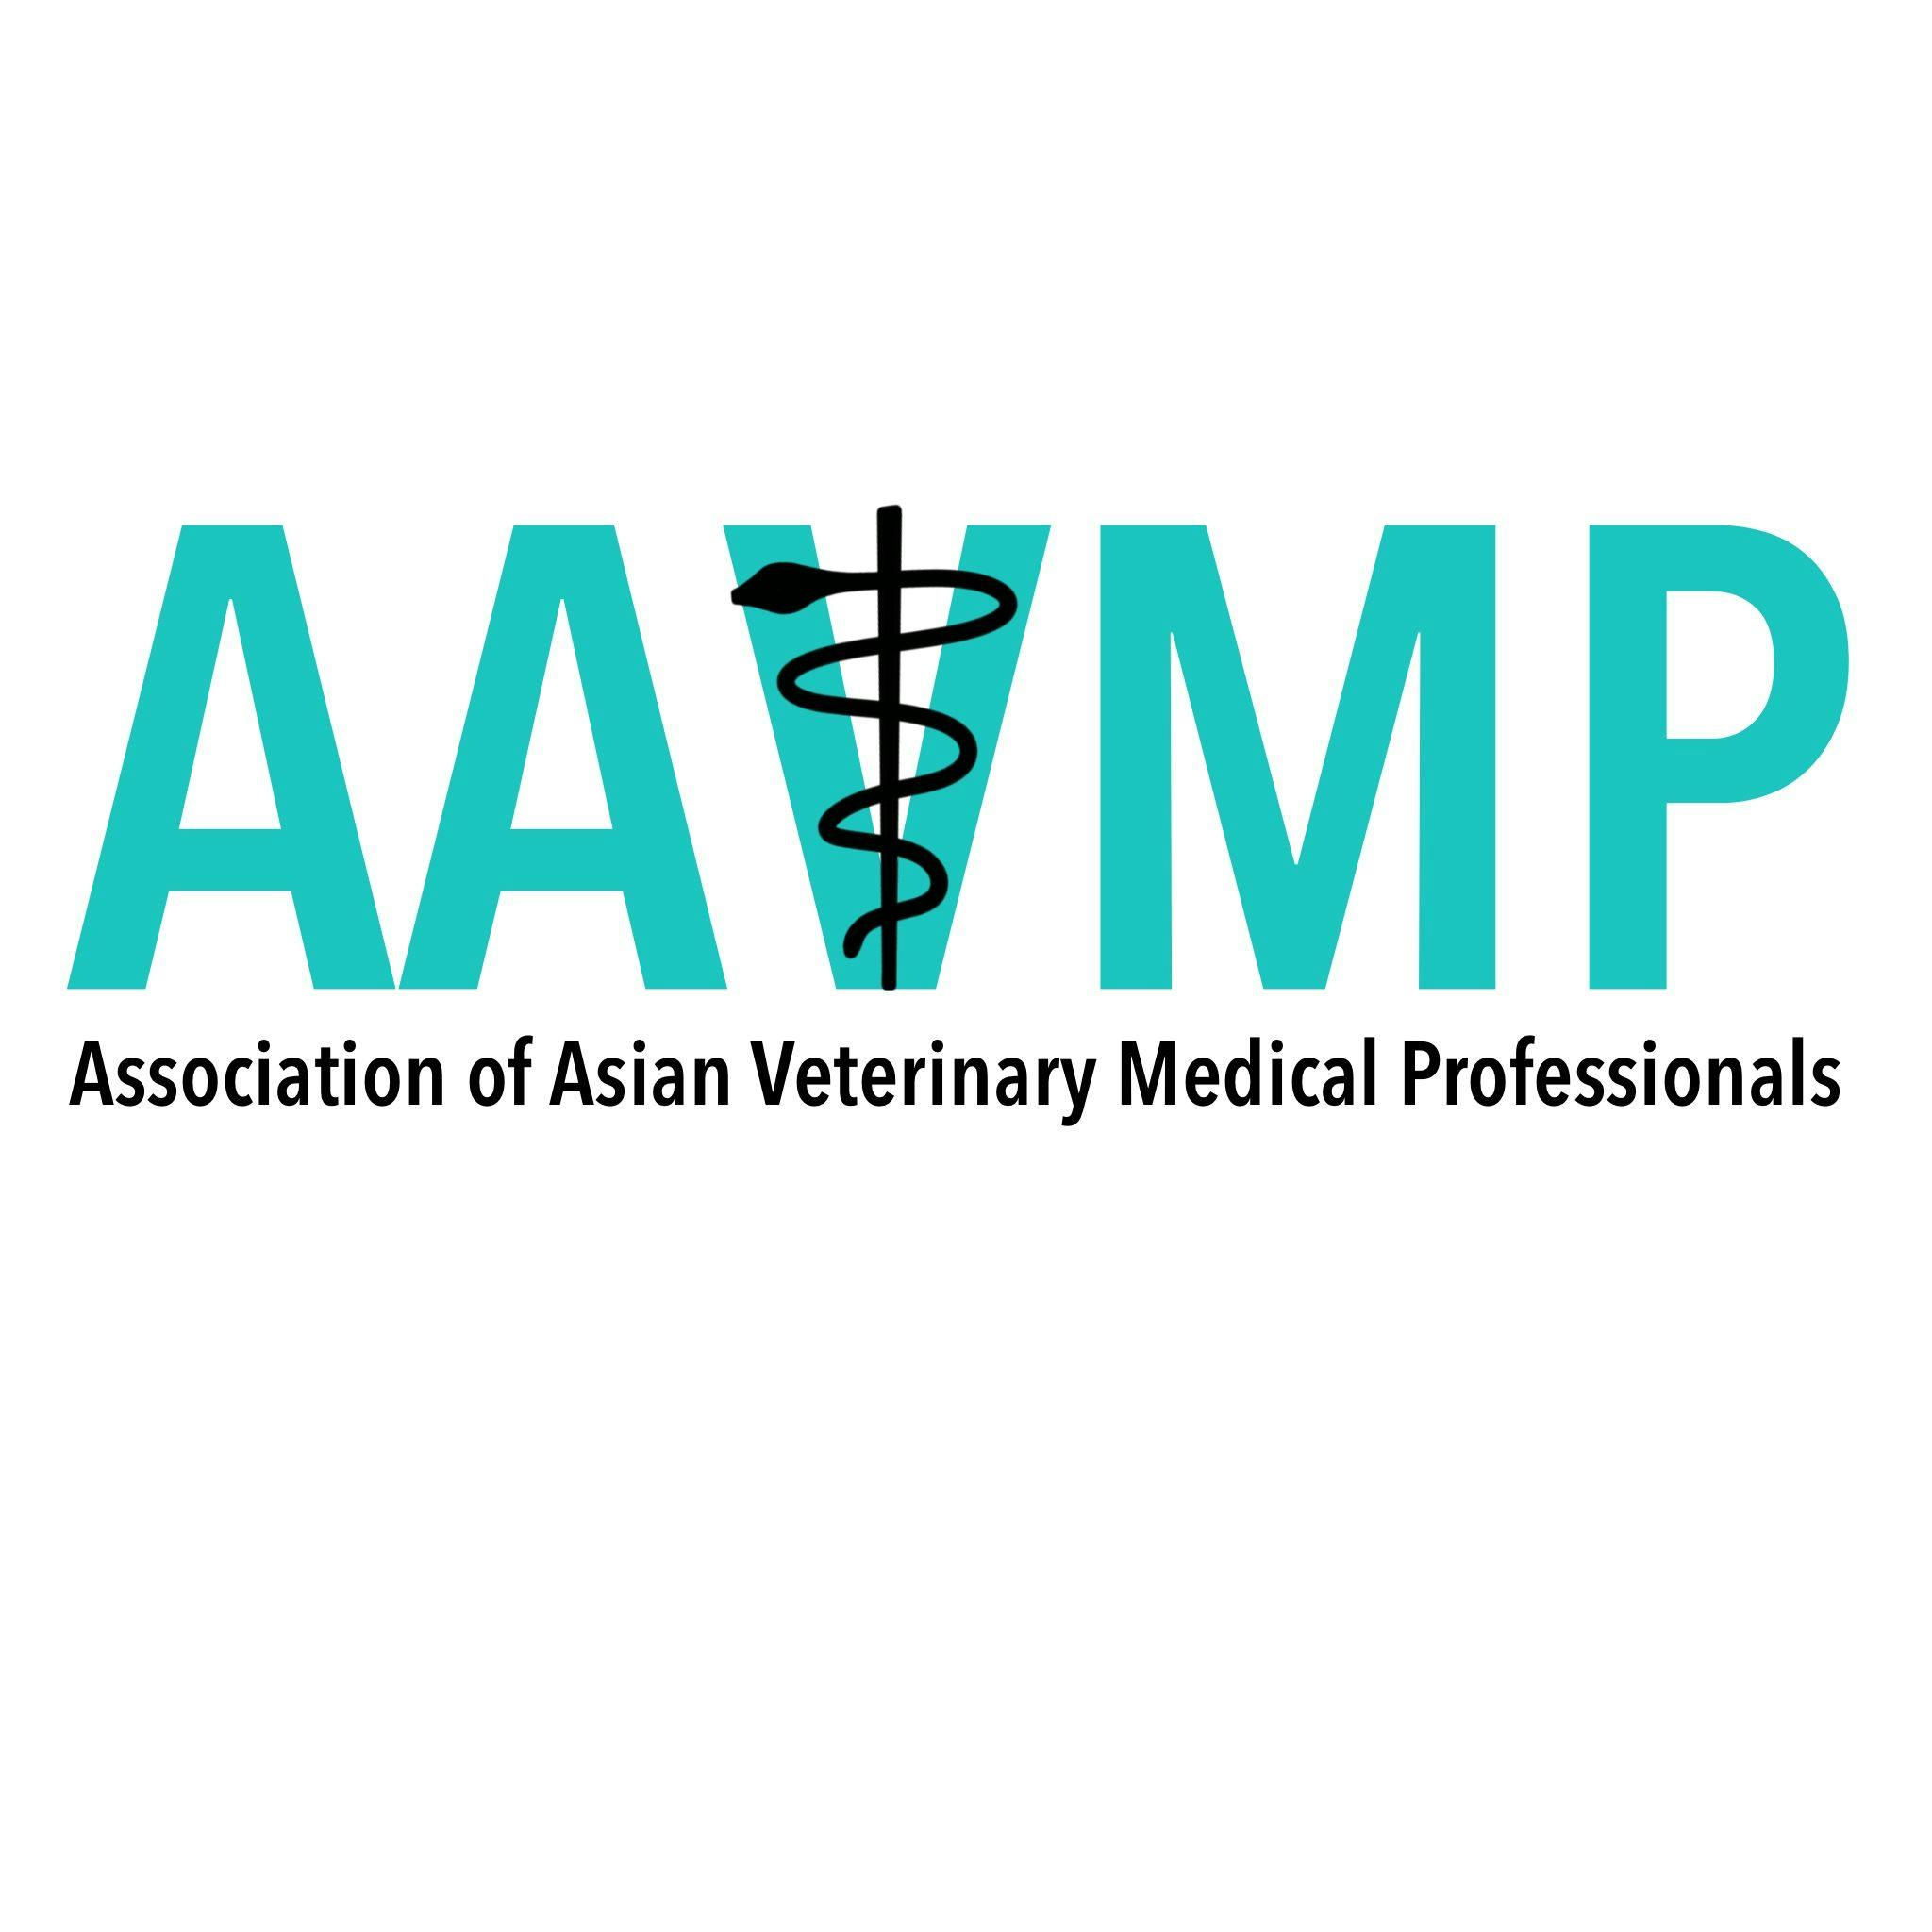 Co-founders of AAVMP